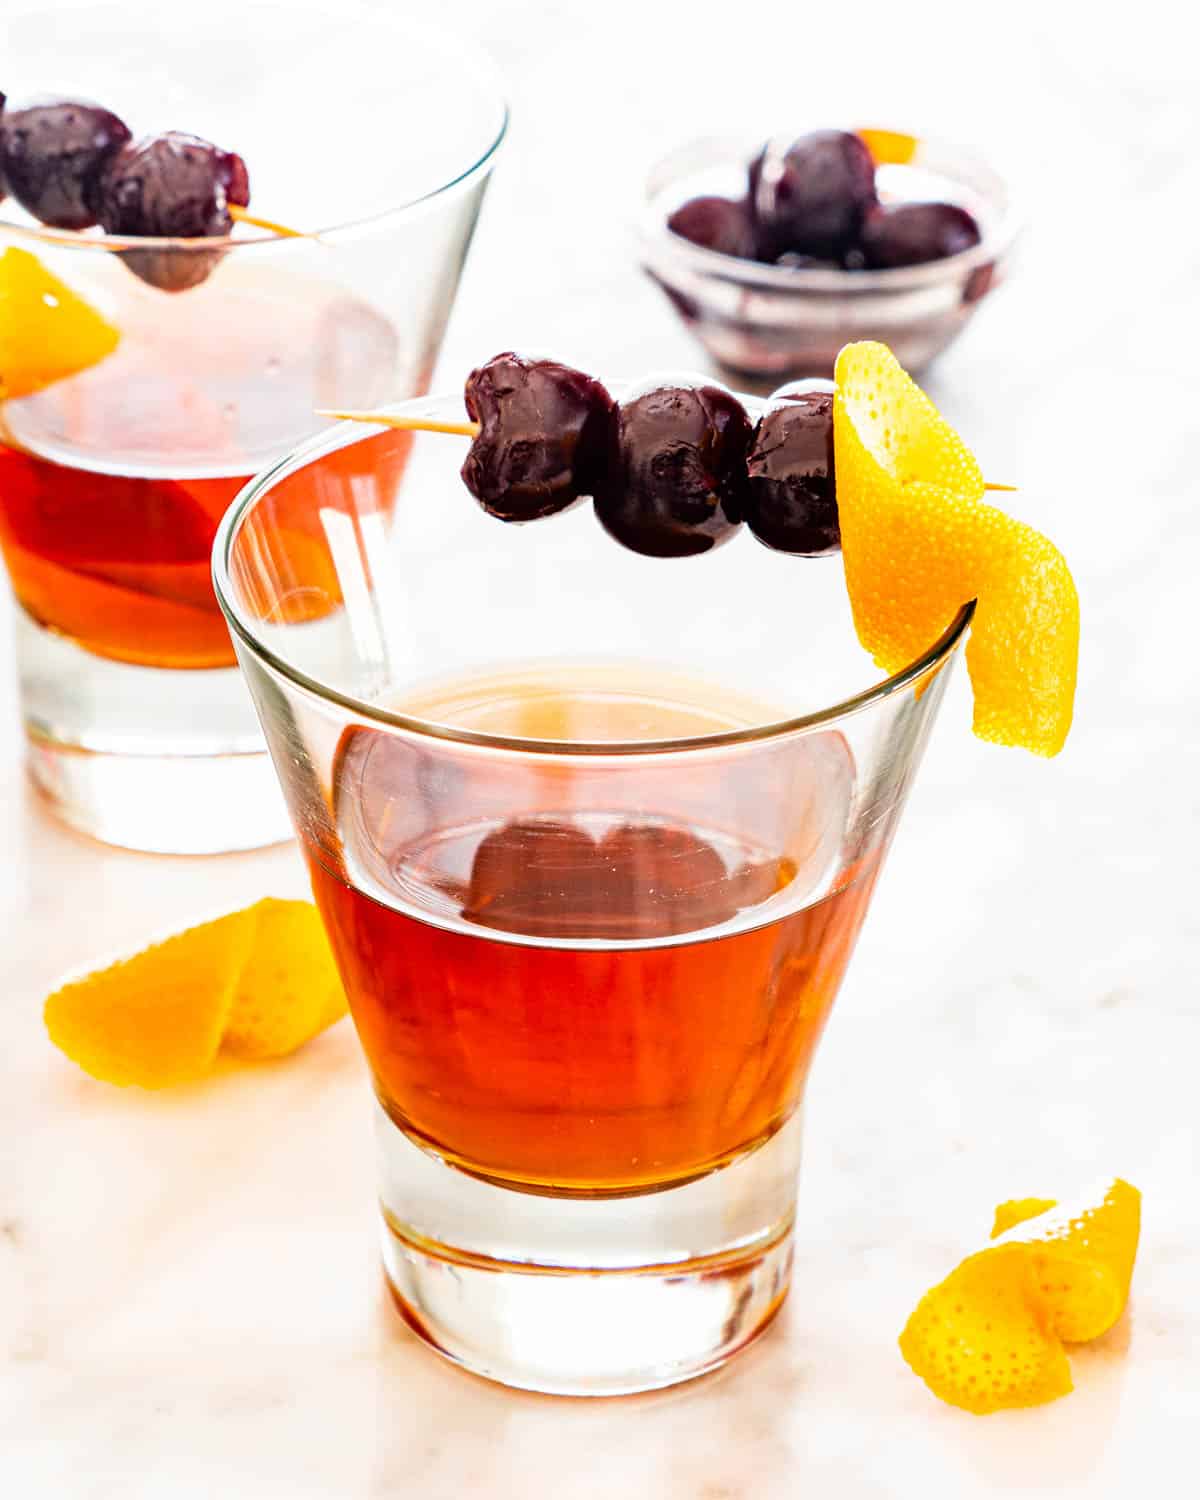 two glasses with manhattan garnished with cherries and ornage peel